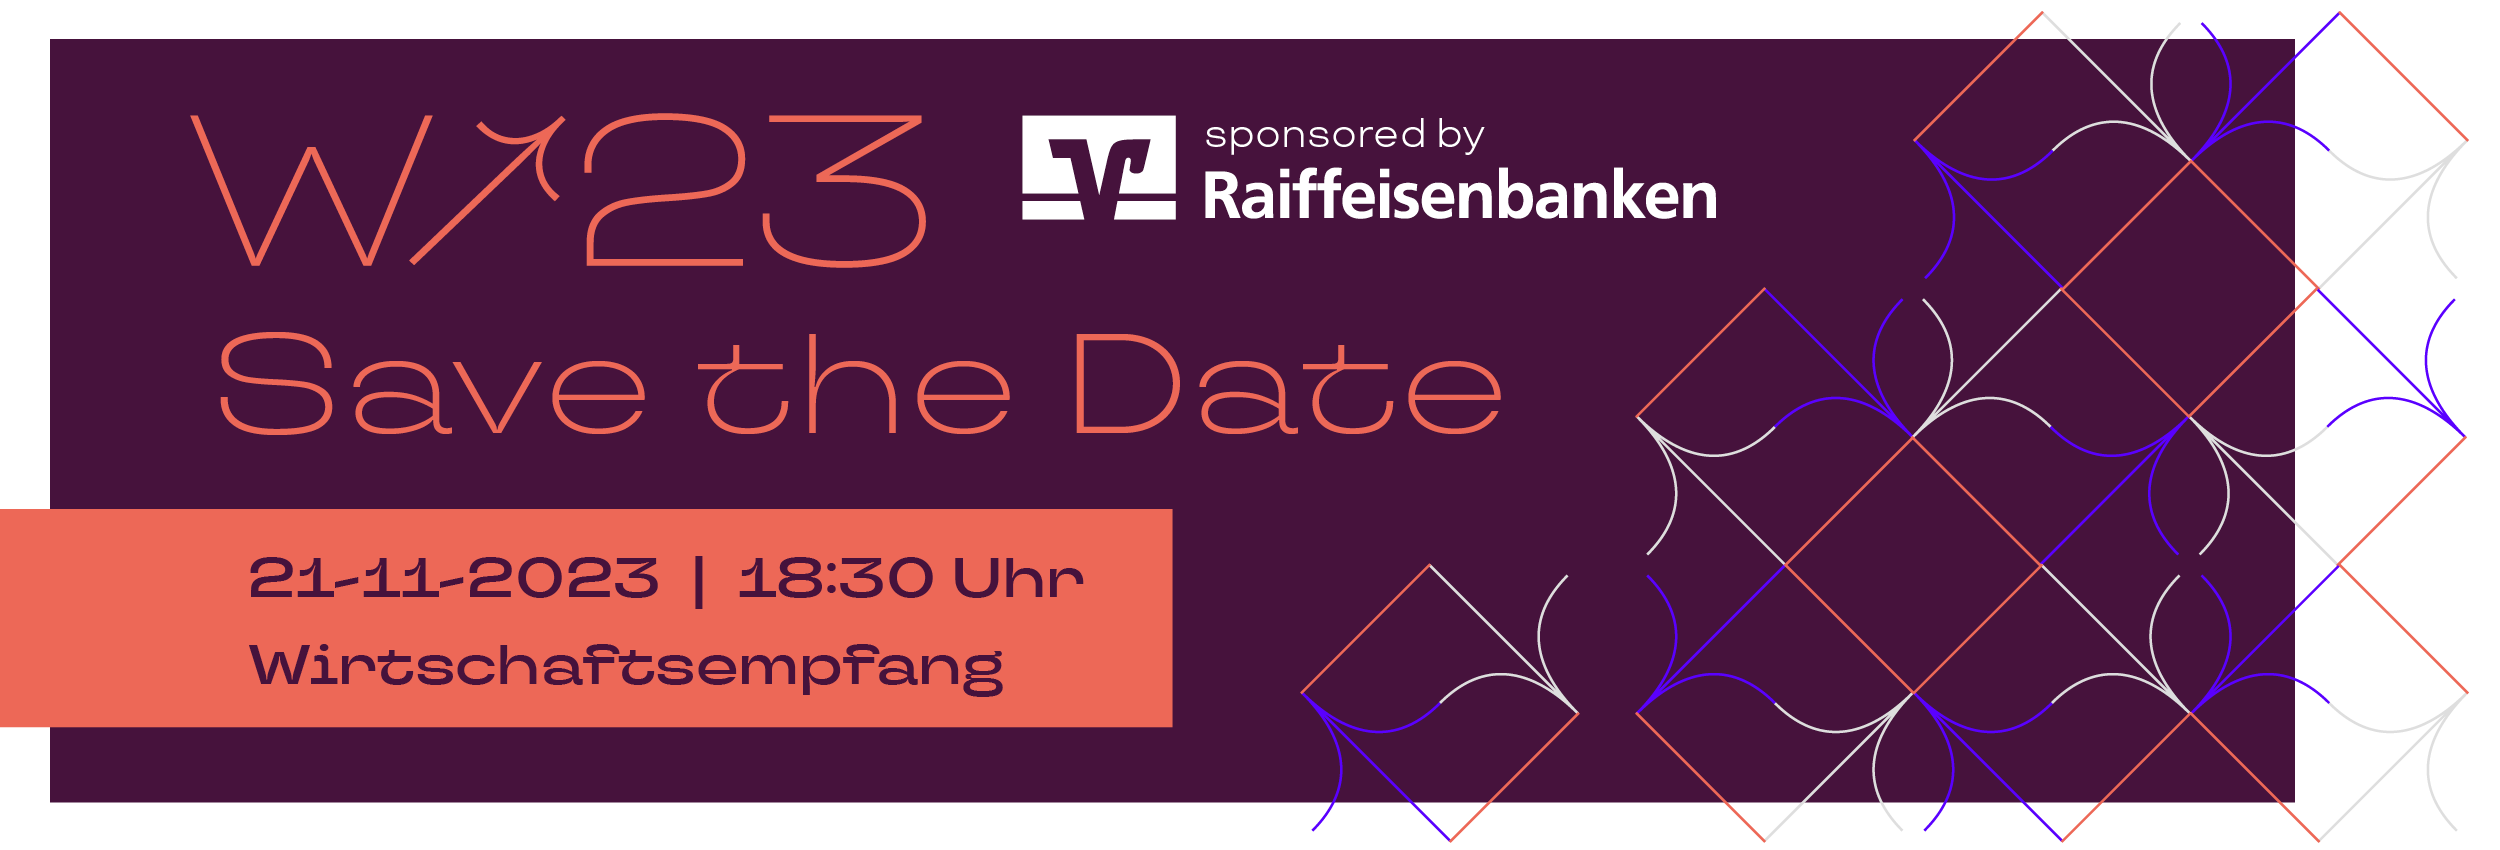 Save-the-Date_Banner_2500x350px_V5 (1)